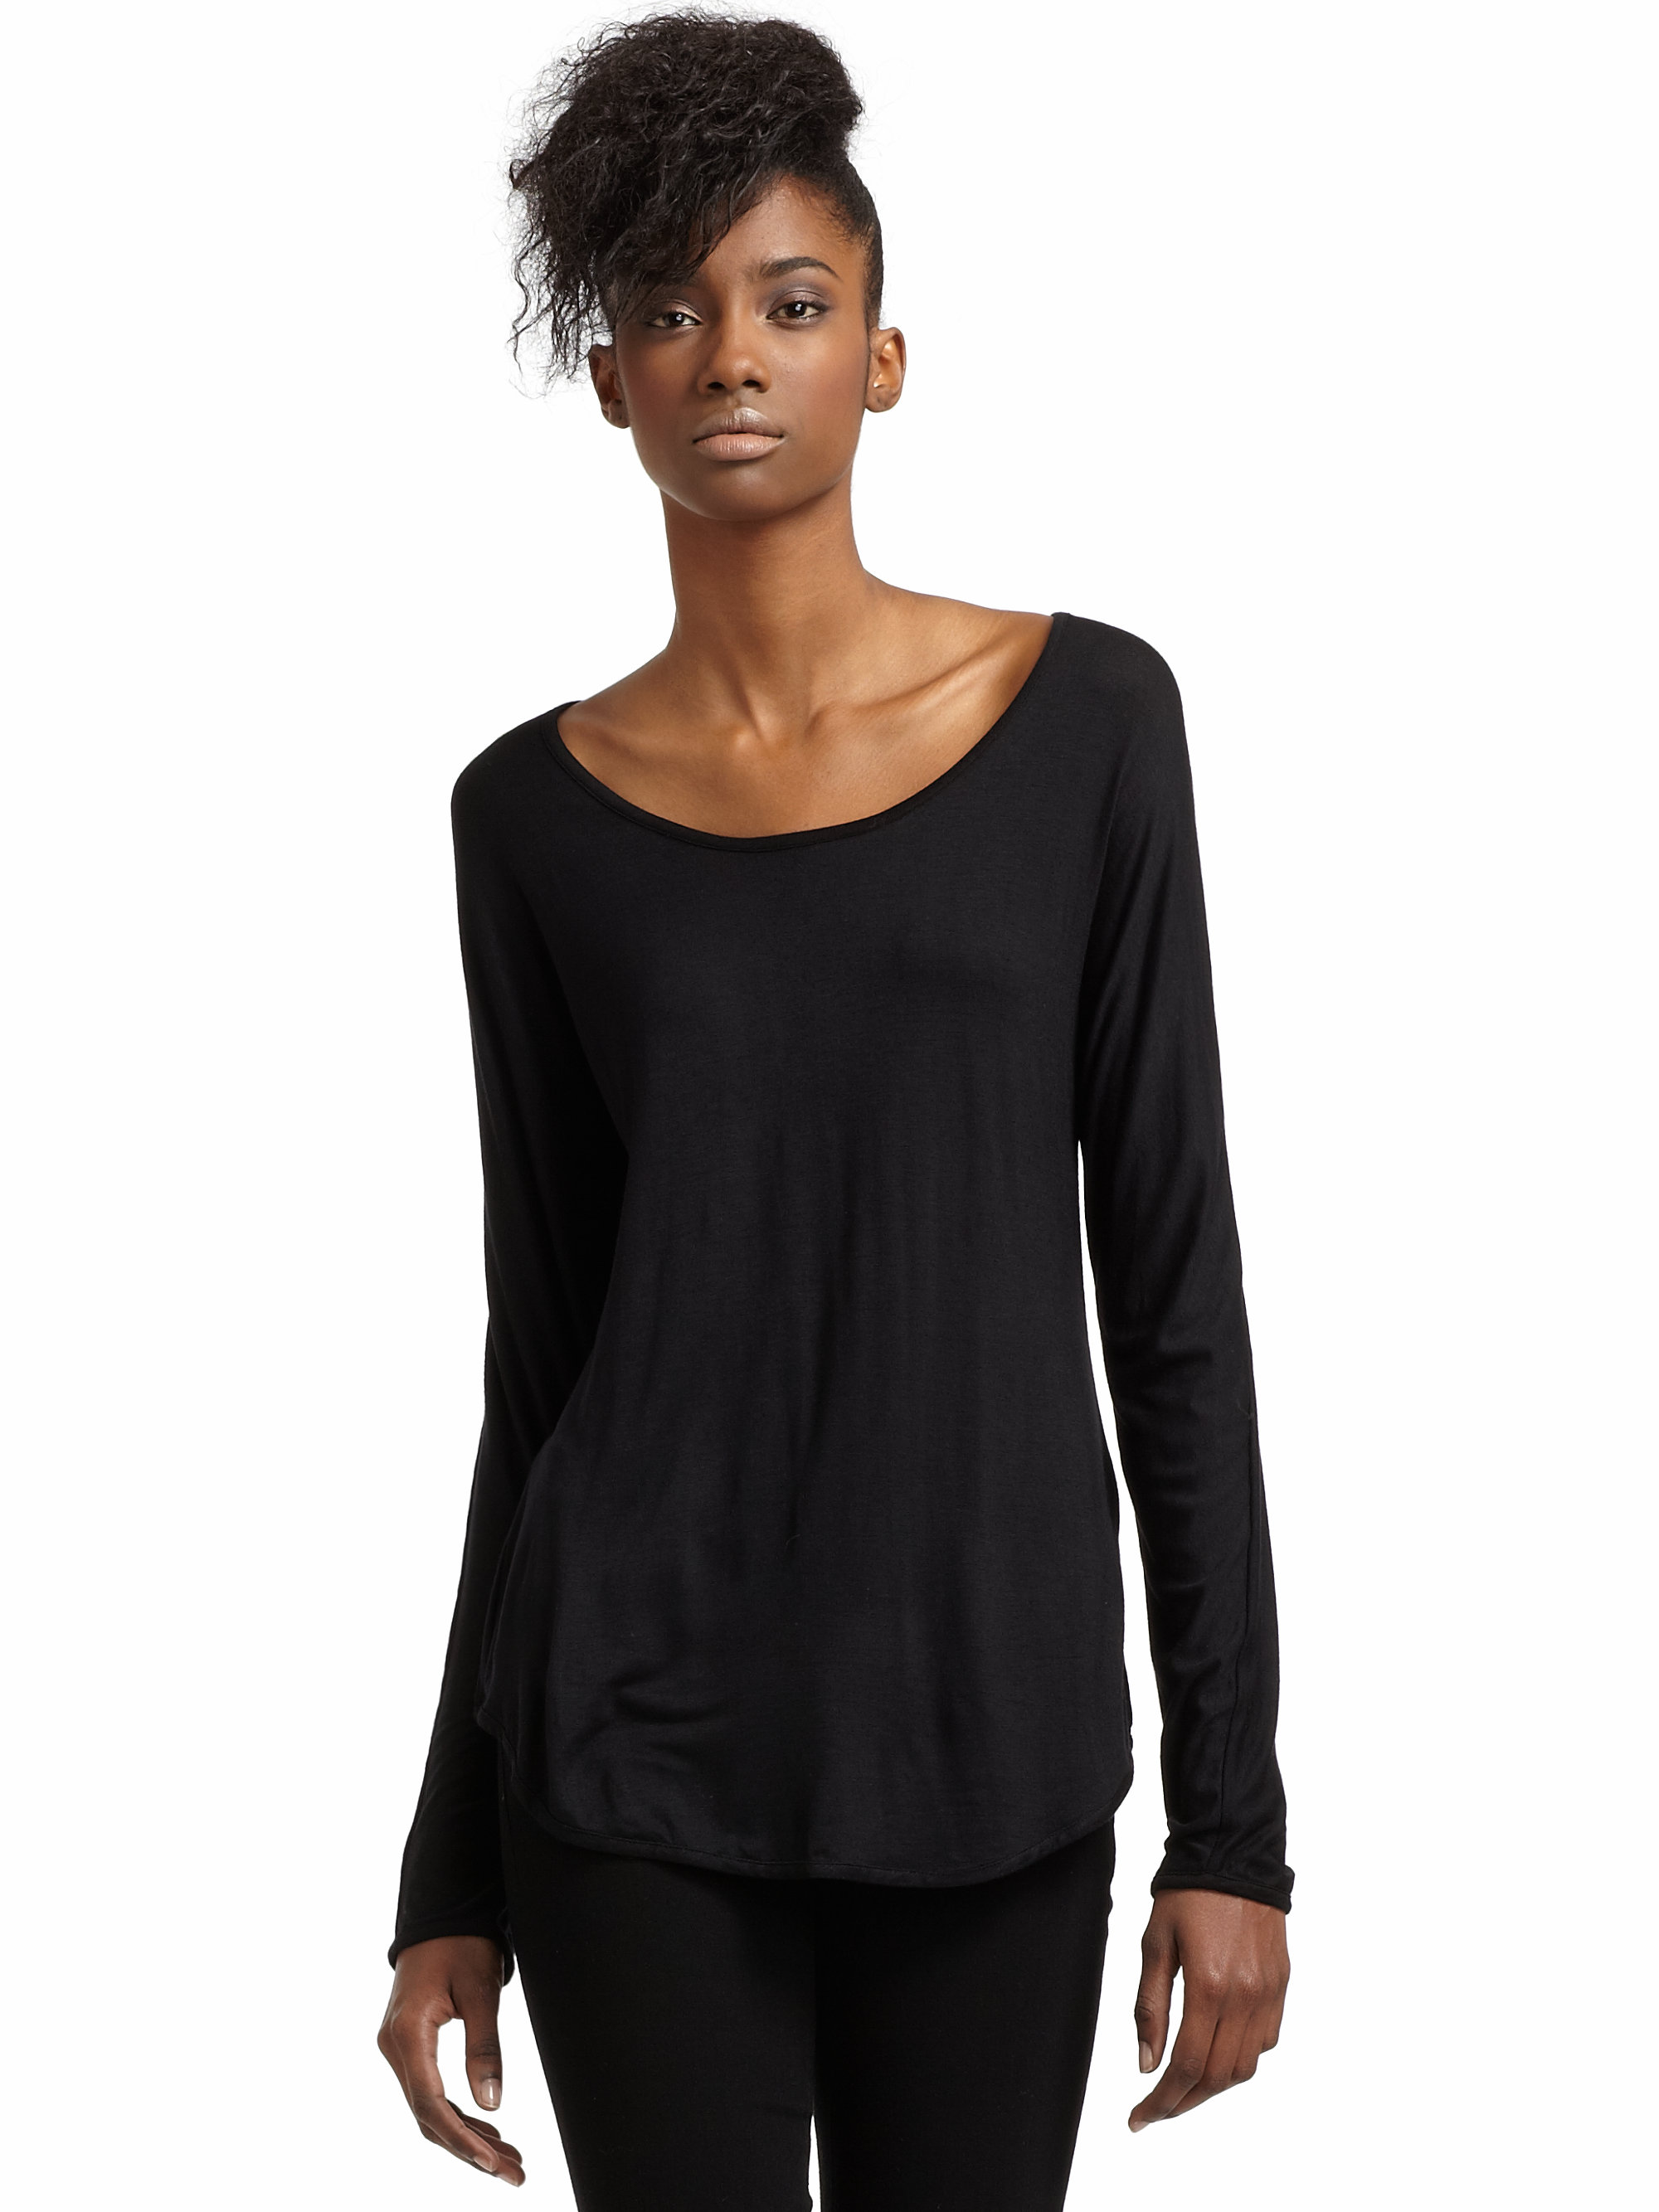 Lyst - Society For Rational Dress Open back Chain Top in Black